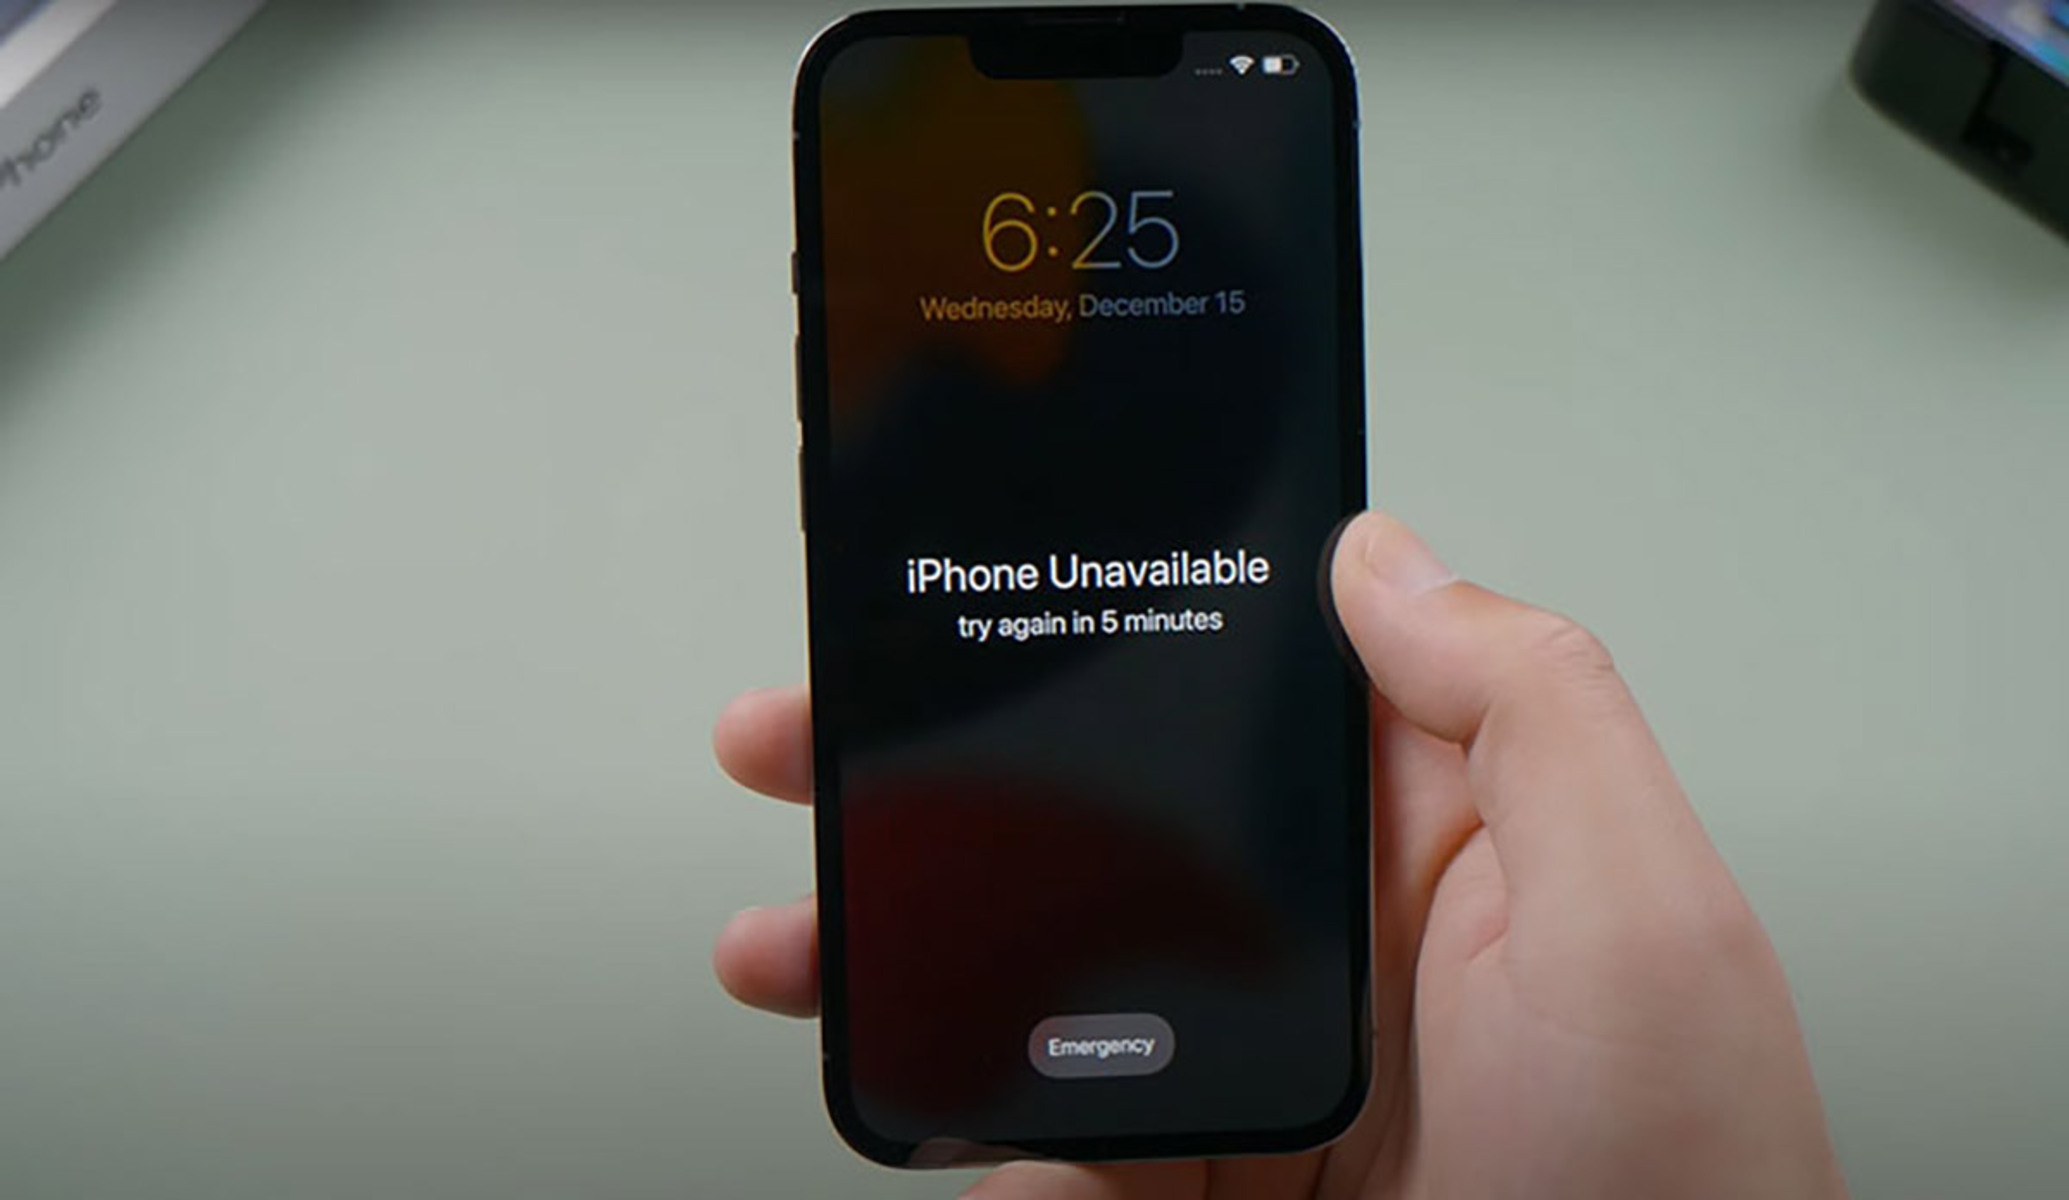 iphone-unavailable-unlock-resolving-iphone-unavailable-issue